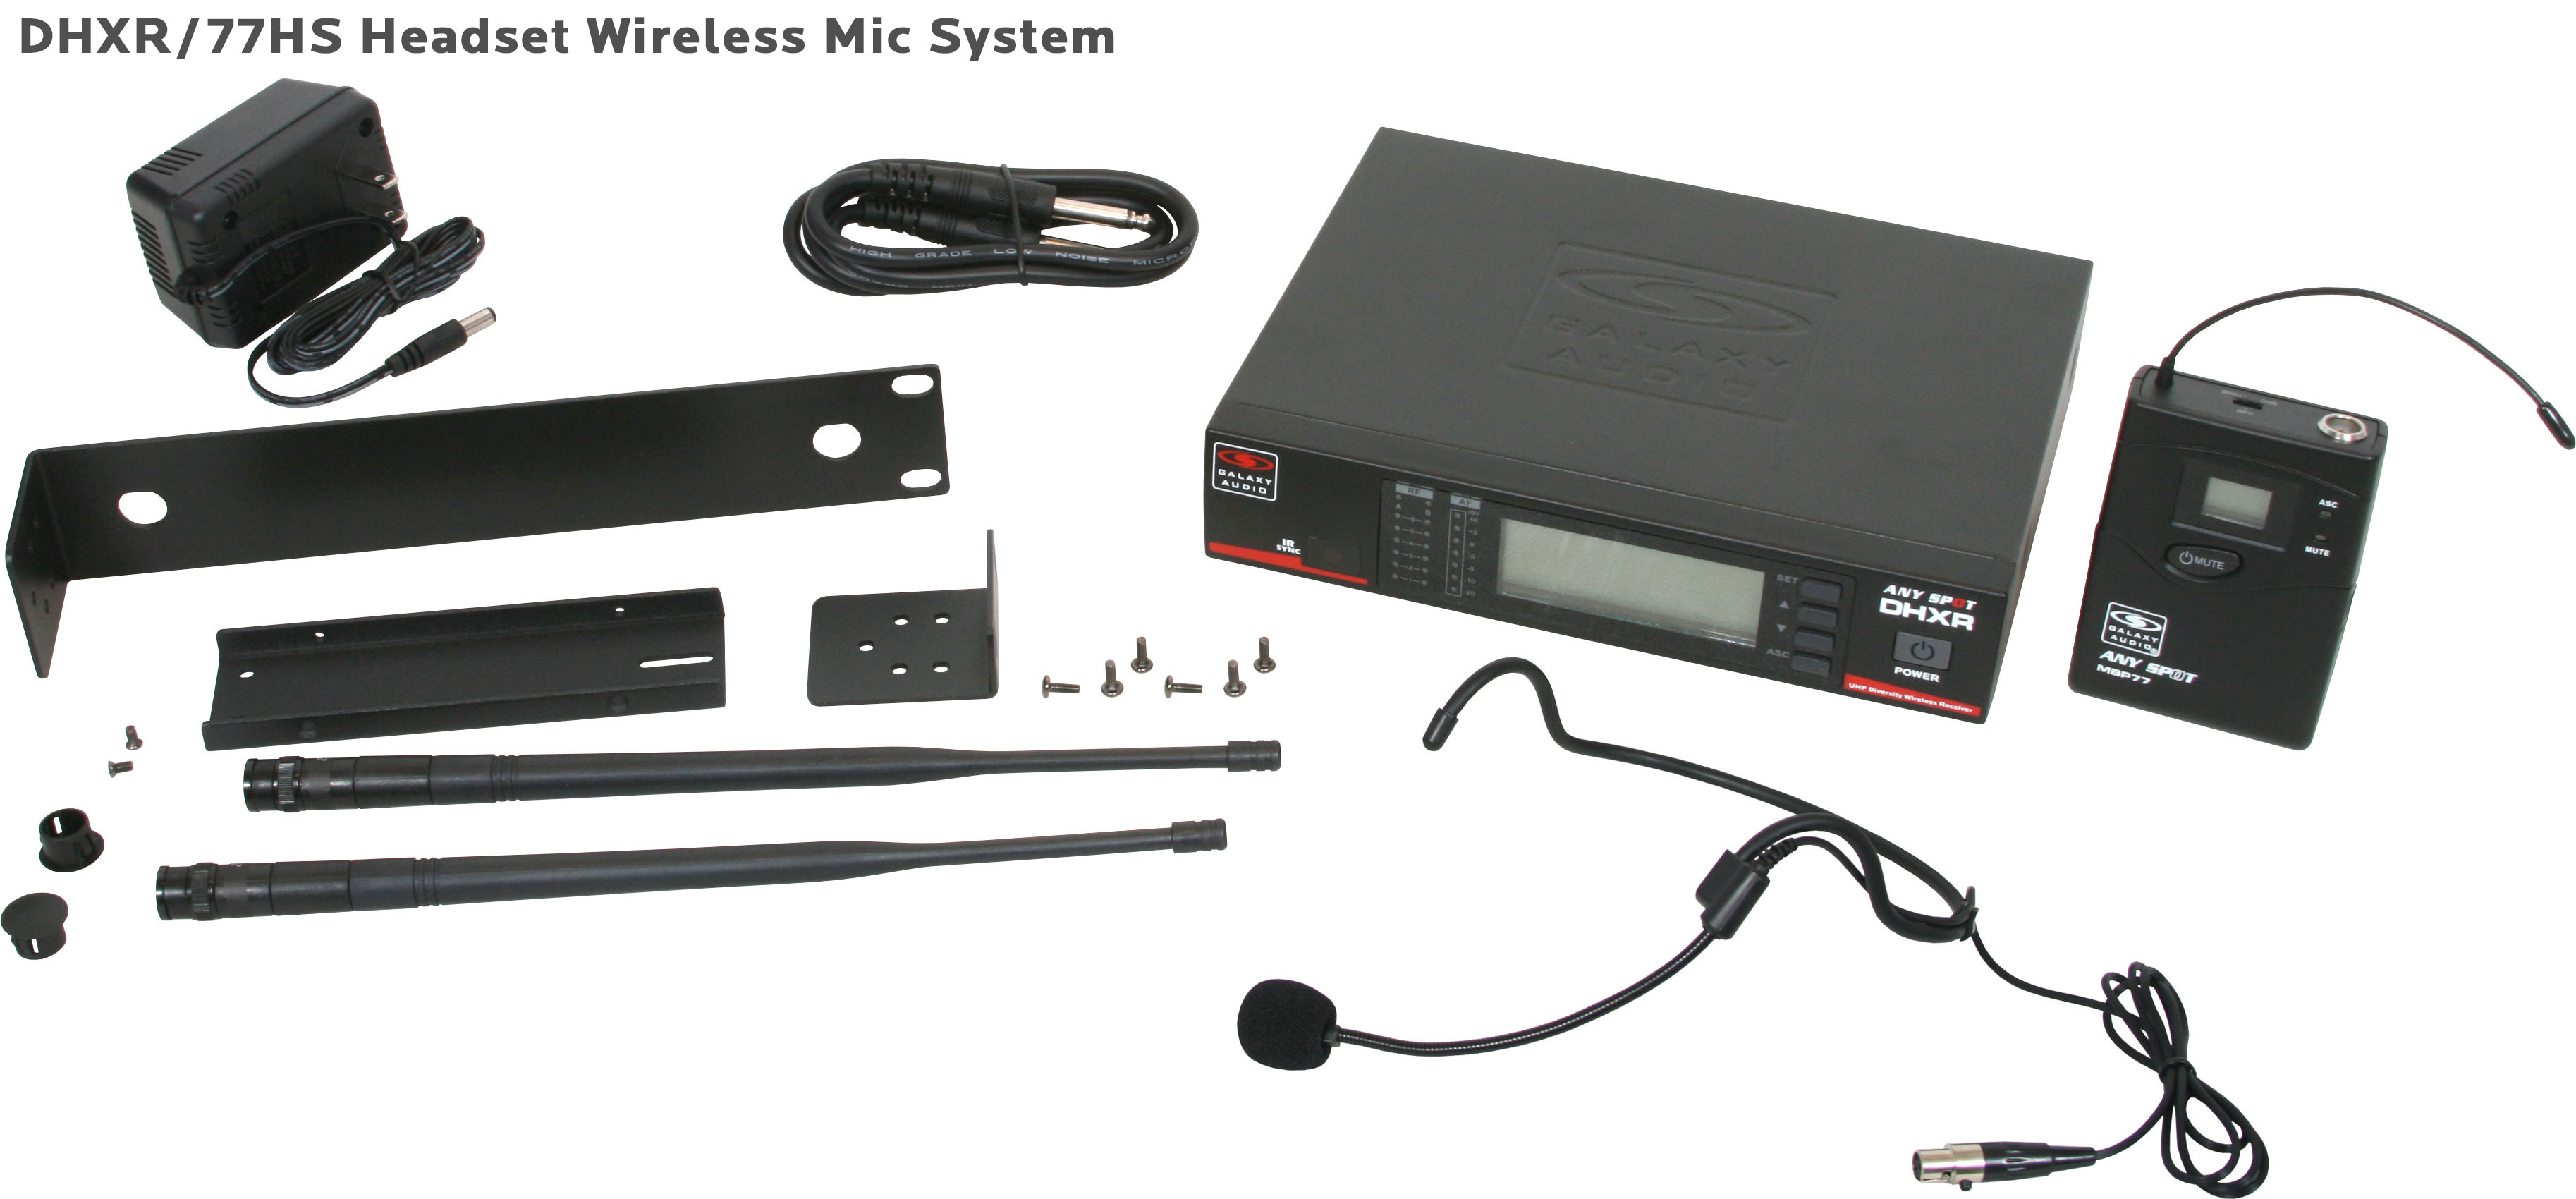 GTD Audio UHF 200 Selectable Frequency Channels Professional Wireless Microphone System B88 Headset & Lapel Lavalier Mic 